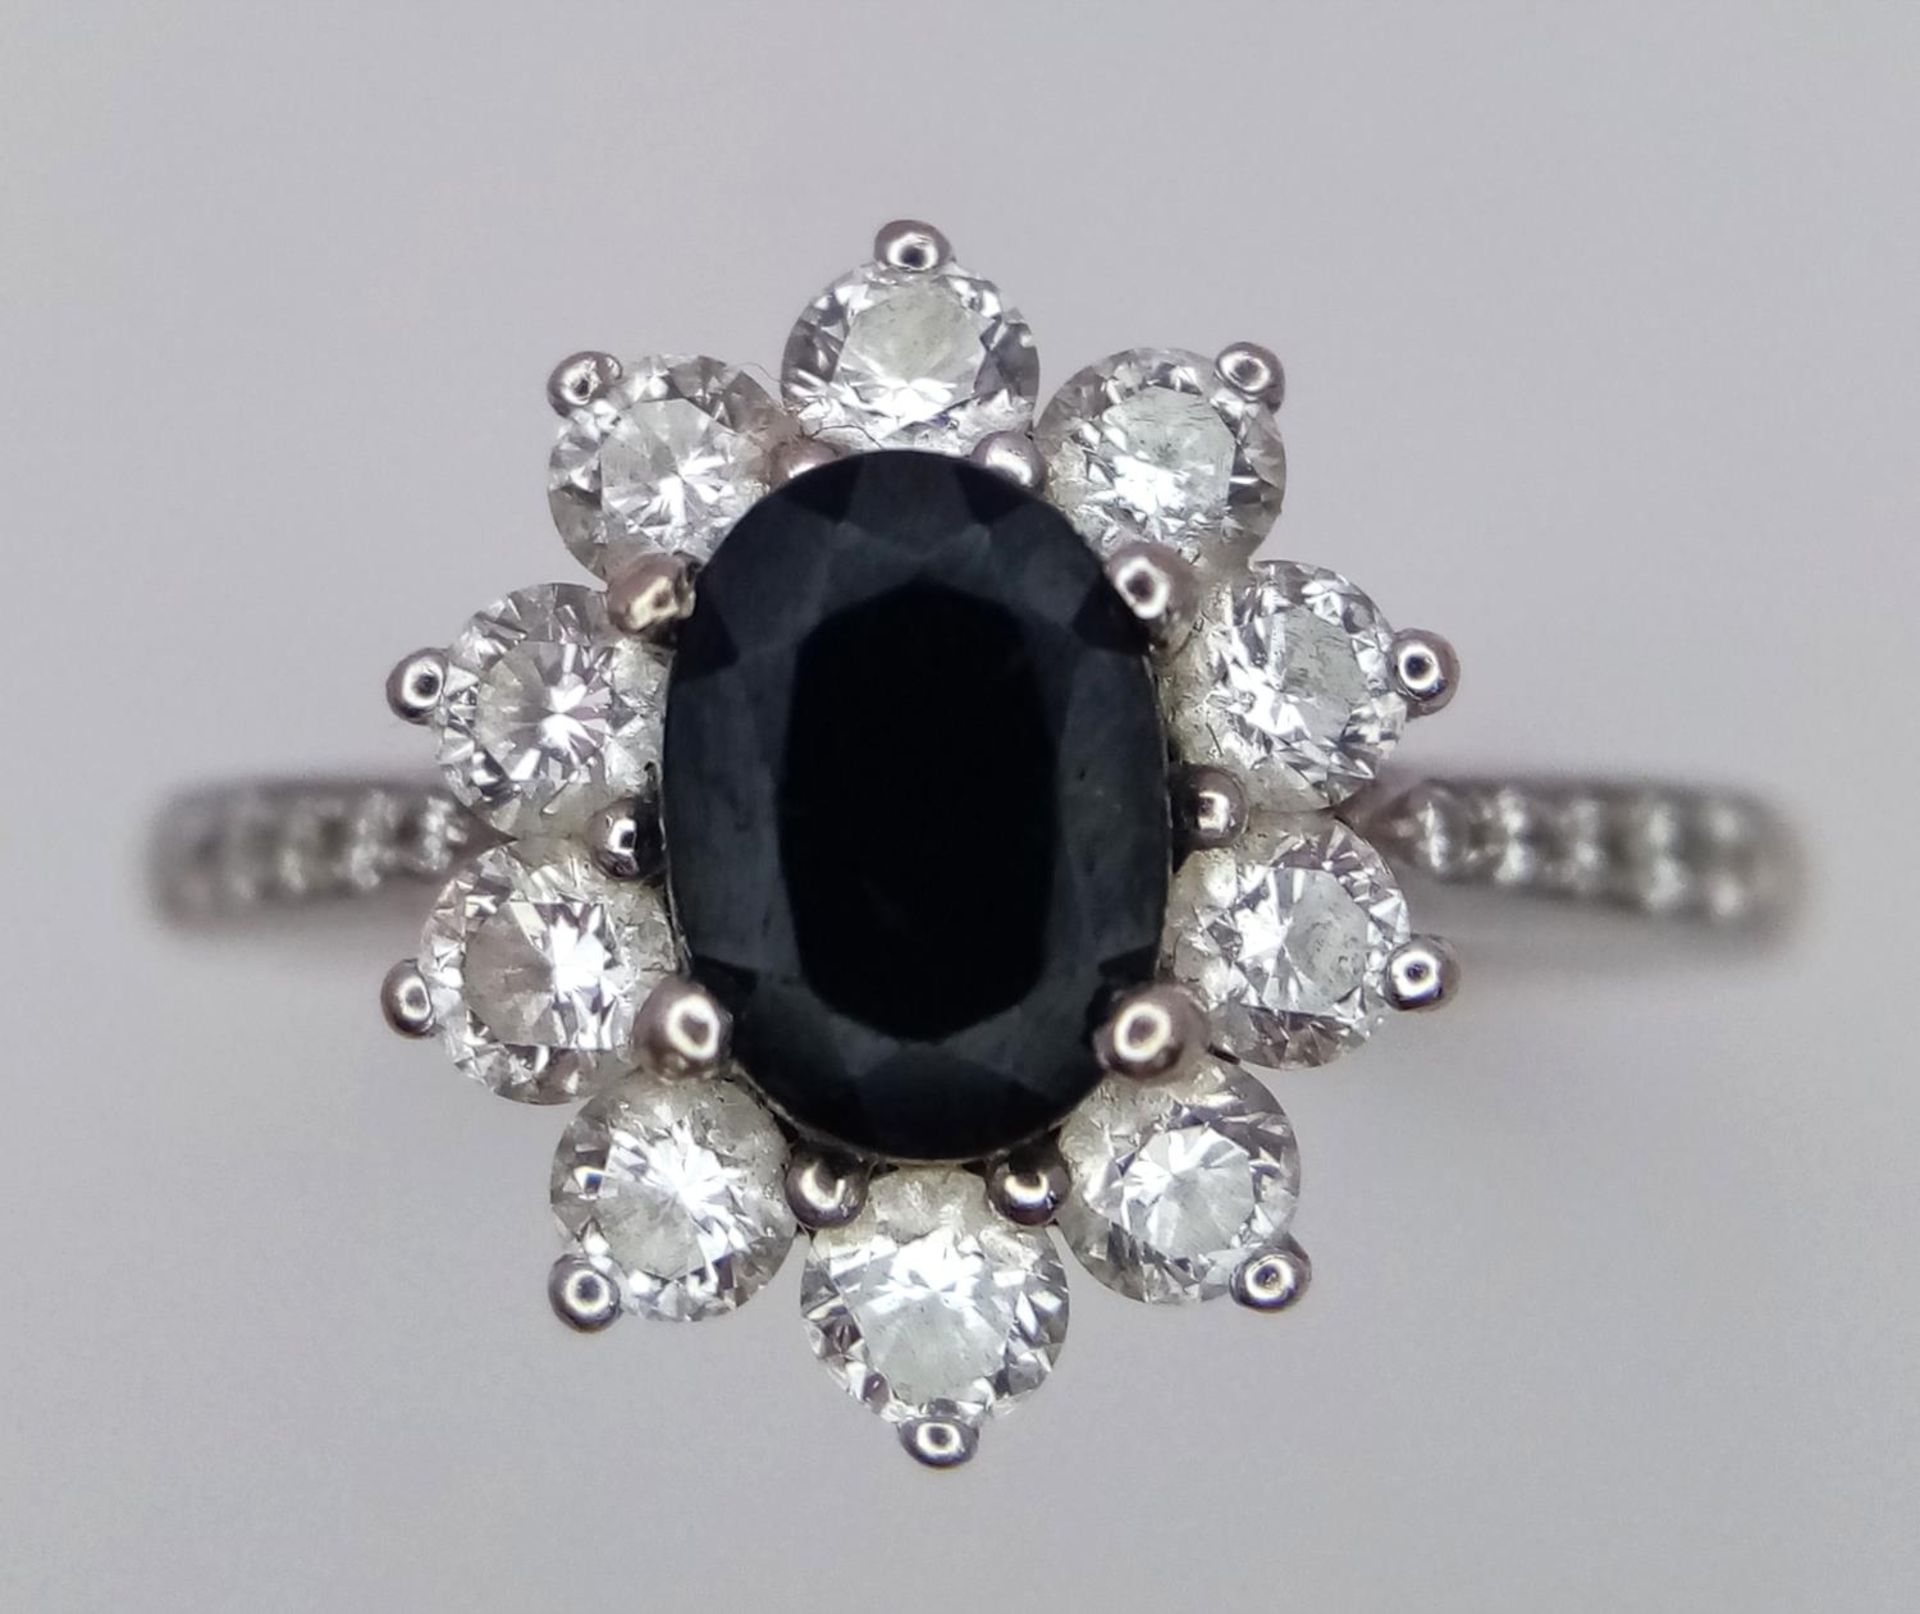 A 18K (TESTED AS) WHITE GOLD DIAMOND & SAPPHIRE CLUSTER RING 0.50CT DIAMONDS & 1CT OVAL SAPPHIRE 4. - Image 3 of 4